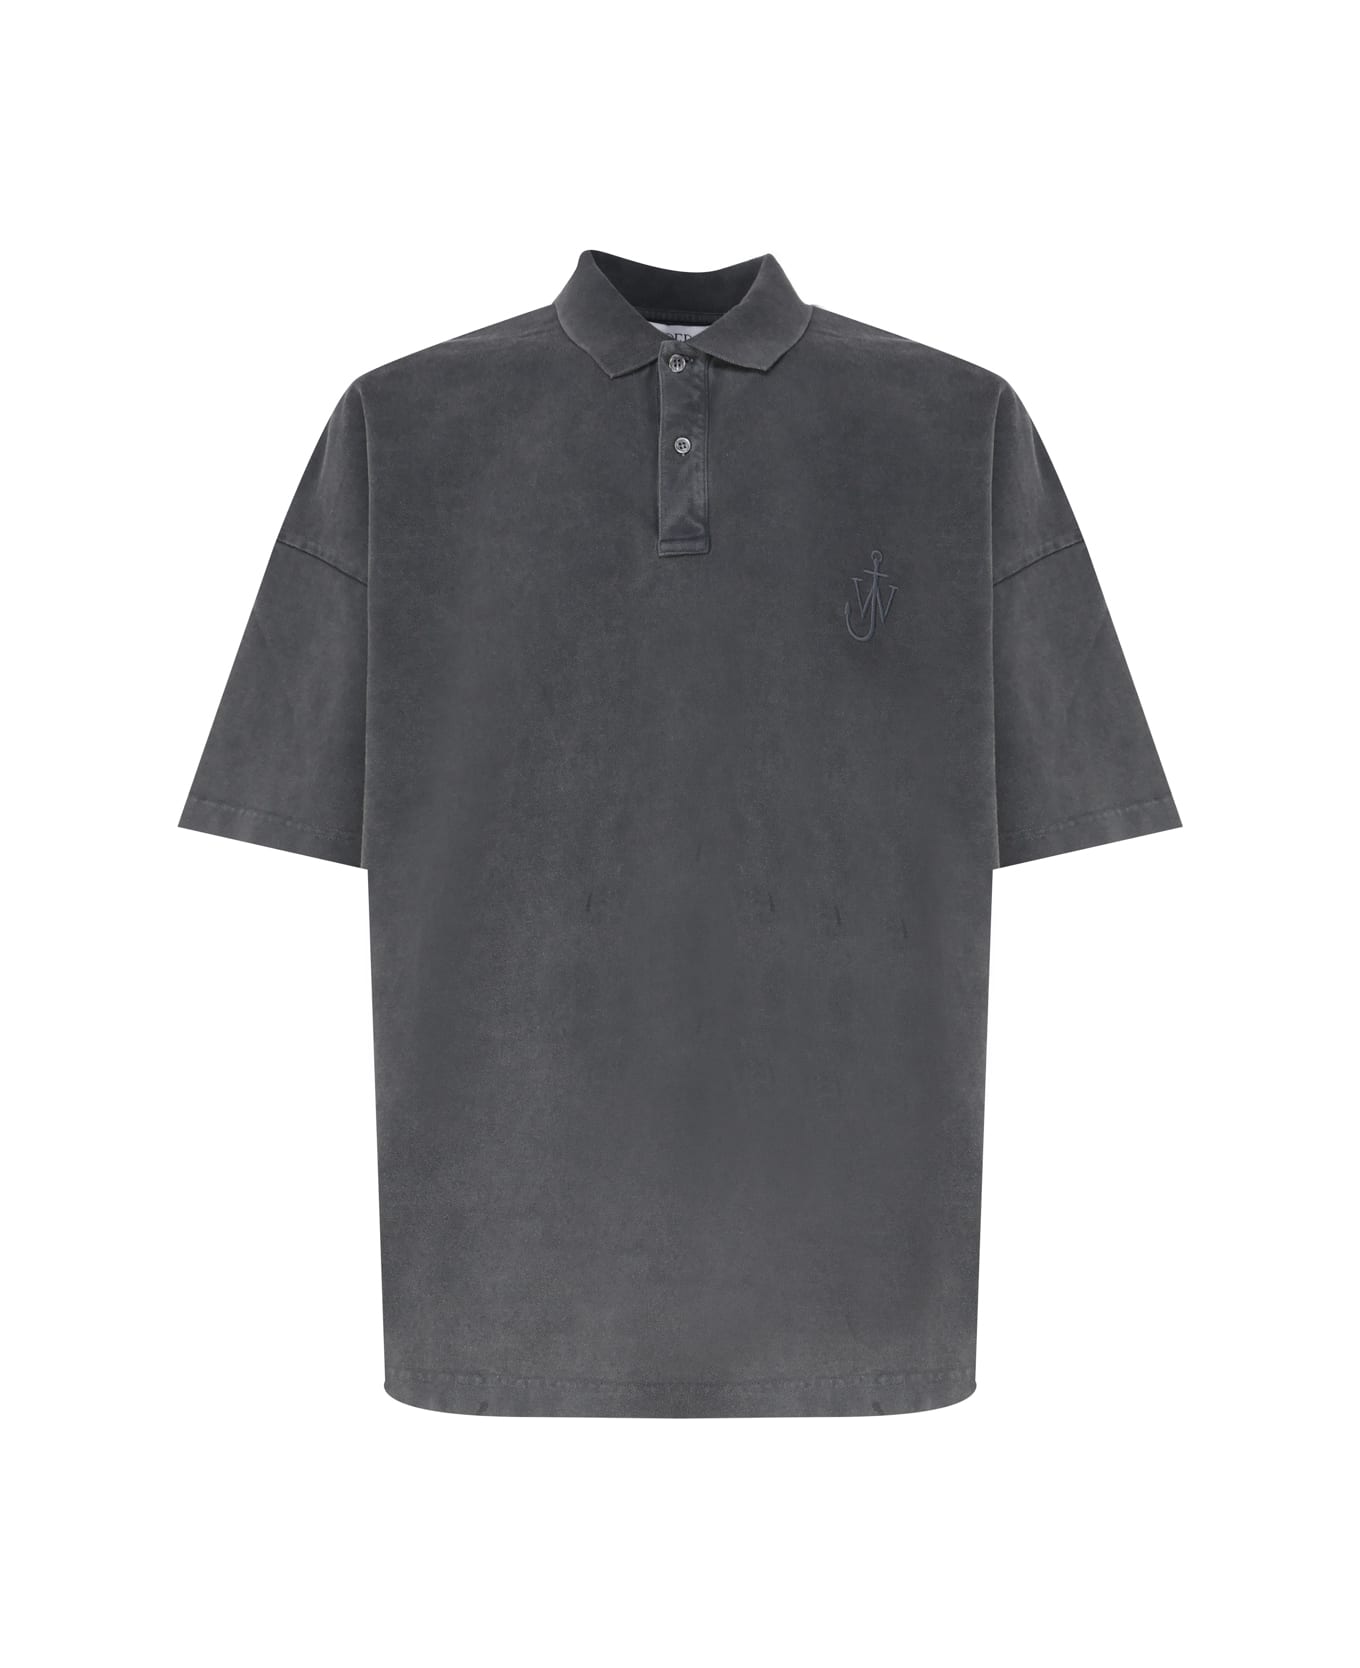 J.W. Anderson Polo Shirt With Embroidered Logo - Grey